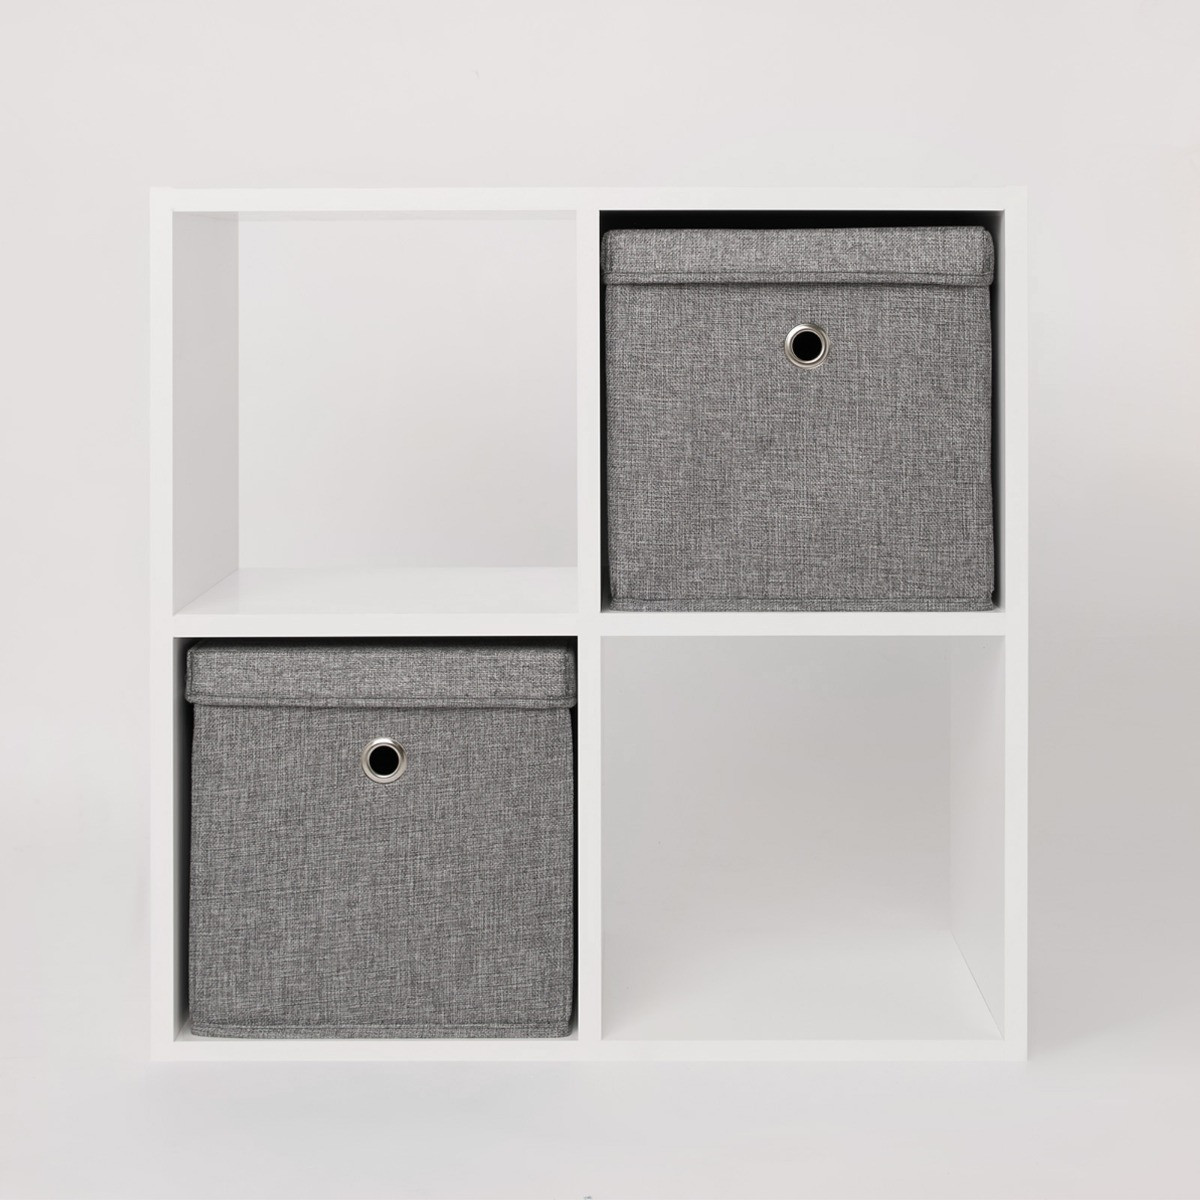 OHS Faux Linen Storage Box With Lid, Charcoal - 2 Pack>